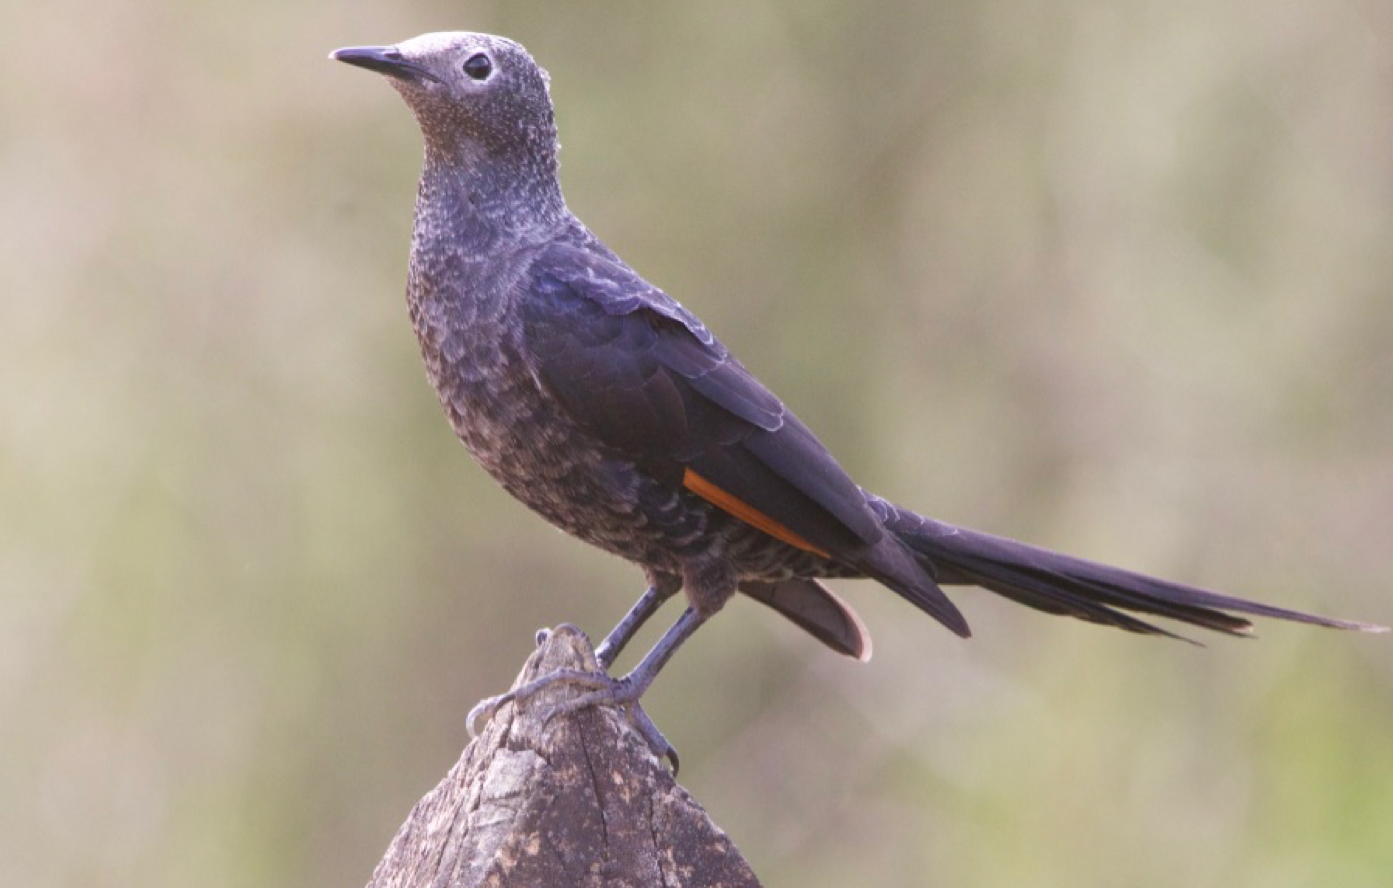 PHOTOS Slender tailed starling